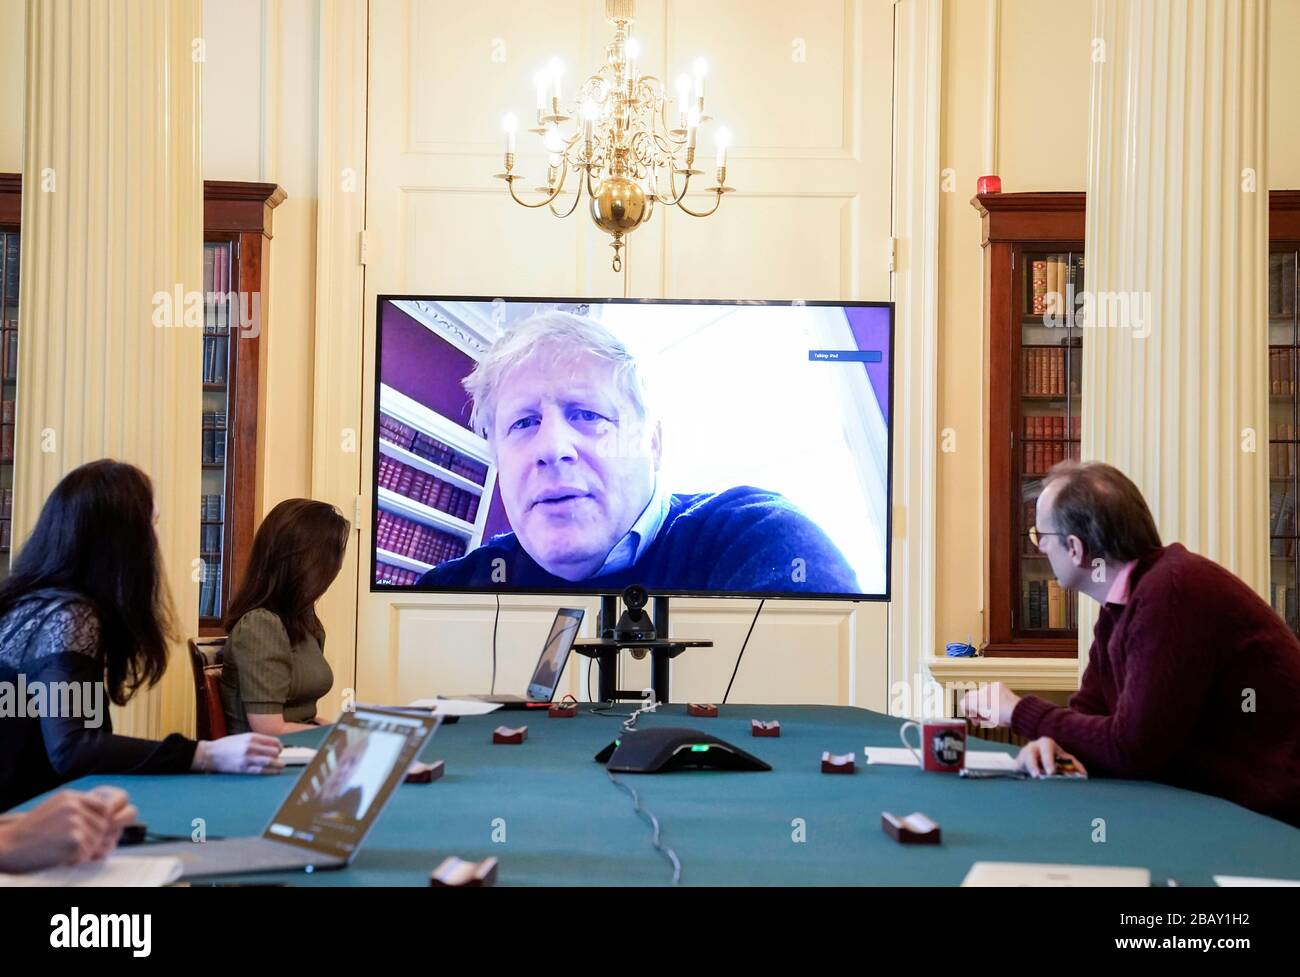 (200329) -- LONDON, March 29, 2020 (Xinhua) -- British Prime Minister Boris Johnson (C) chairs a morning COVID-19 update meeting remotely during his self-isolation after testing positive for COVID-19, in London, Britain, on March 28, 2020. A total of 19,522 COVID-19 cases have been confirmed in Britain as of Sunday morning, marking an increase of 2,433 in the past 24 hours, according to the Department of Health and Social Care. (Andrew Parsons/No 10 Downing Street/Handout via Xinhua) (EDITORIAL USE ONLY) Stock Photo